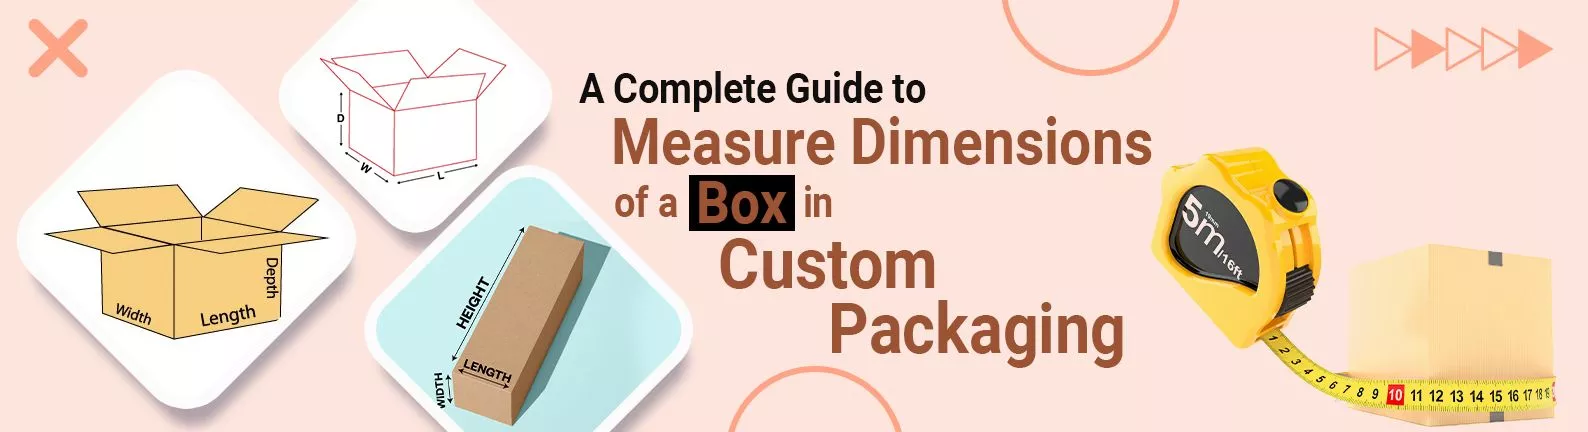 A-Complete-Guide-to-Measure-Dimensions-of-a-Box-in-Custom-Packaging